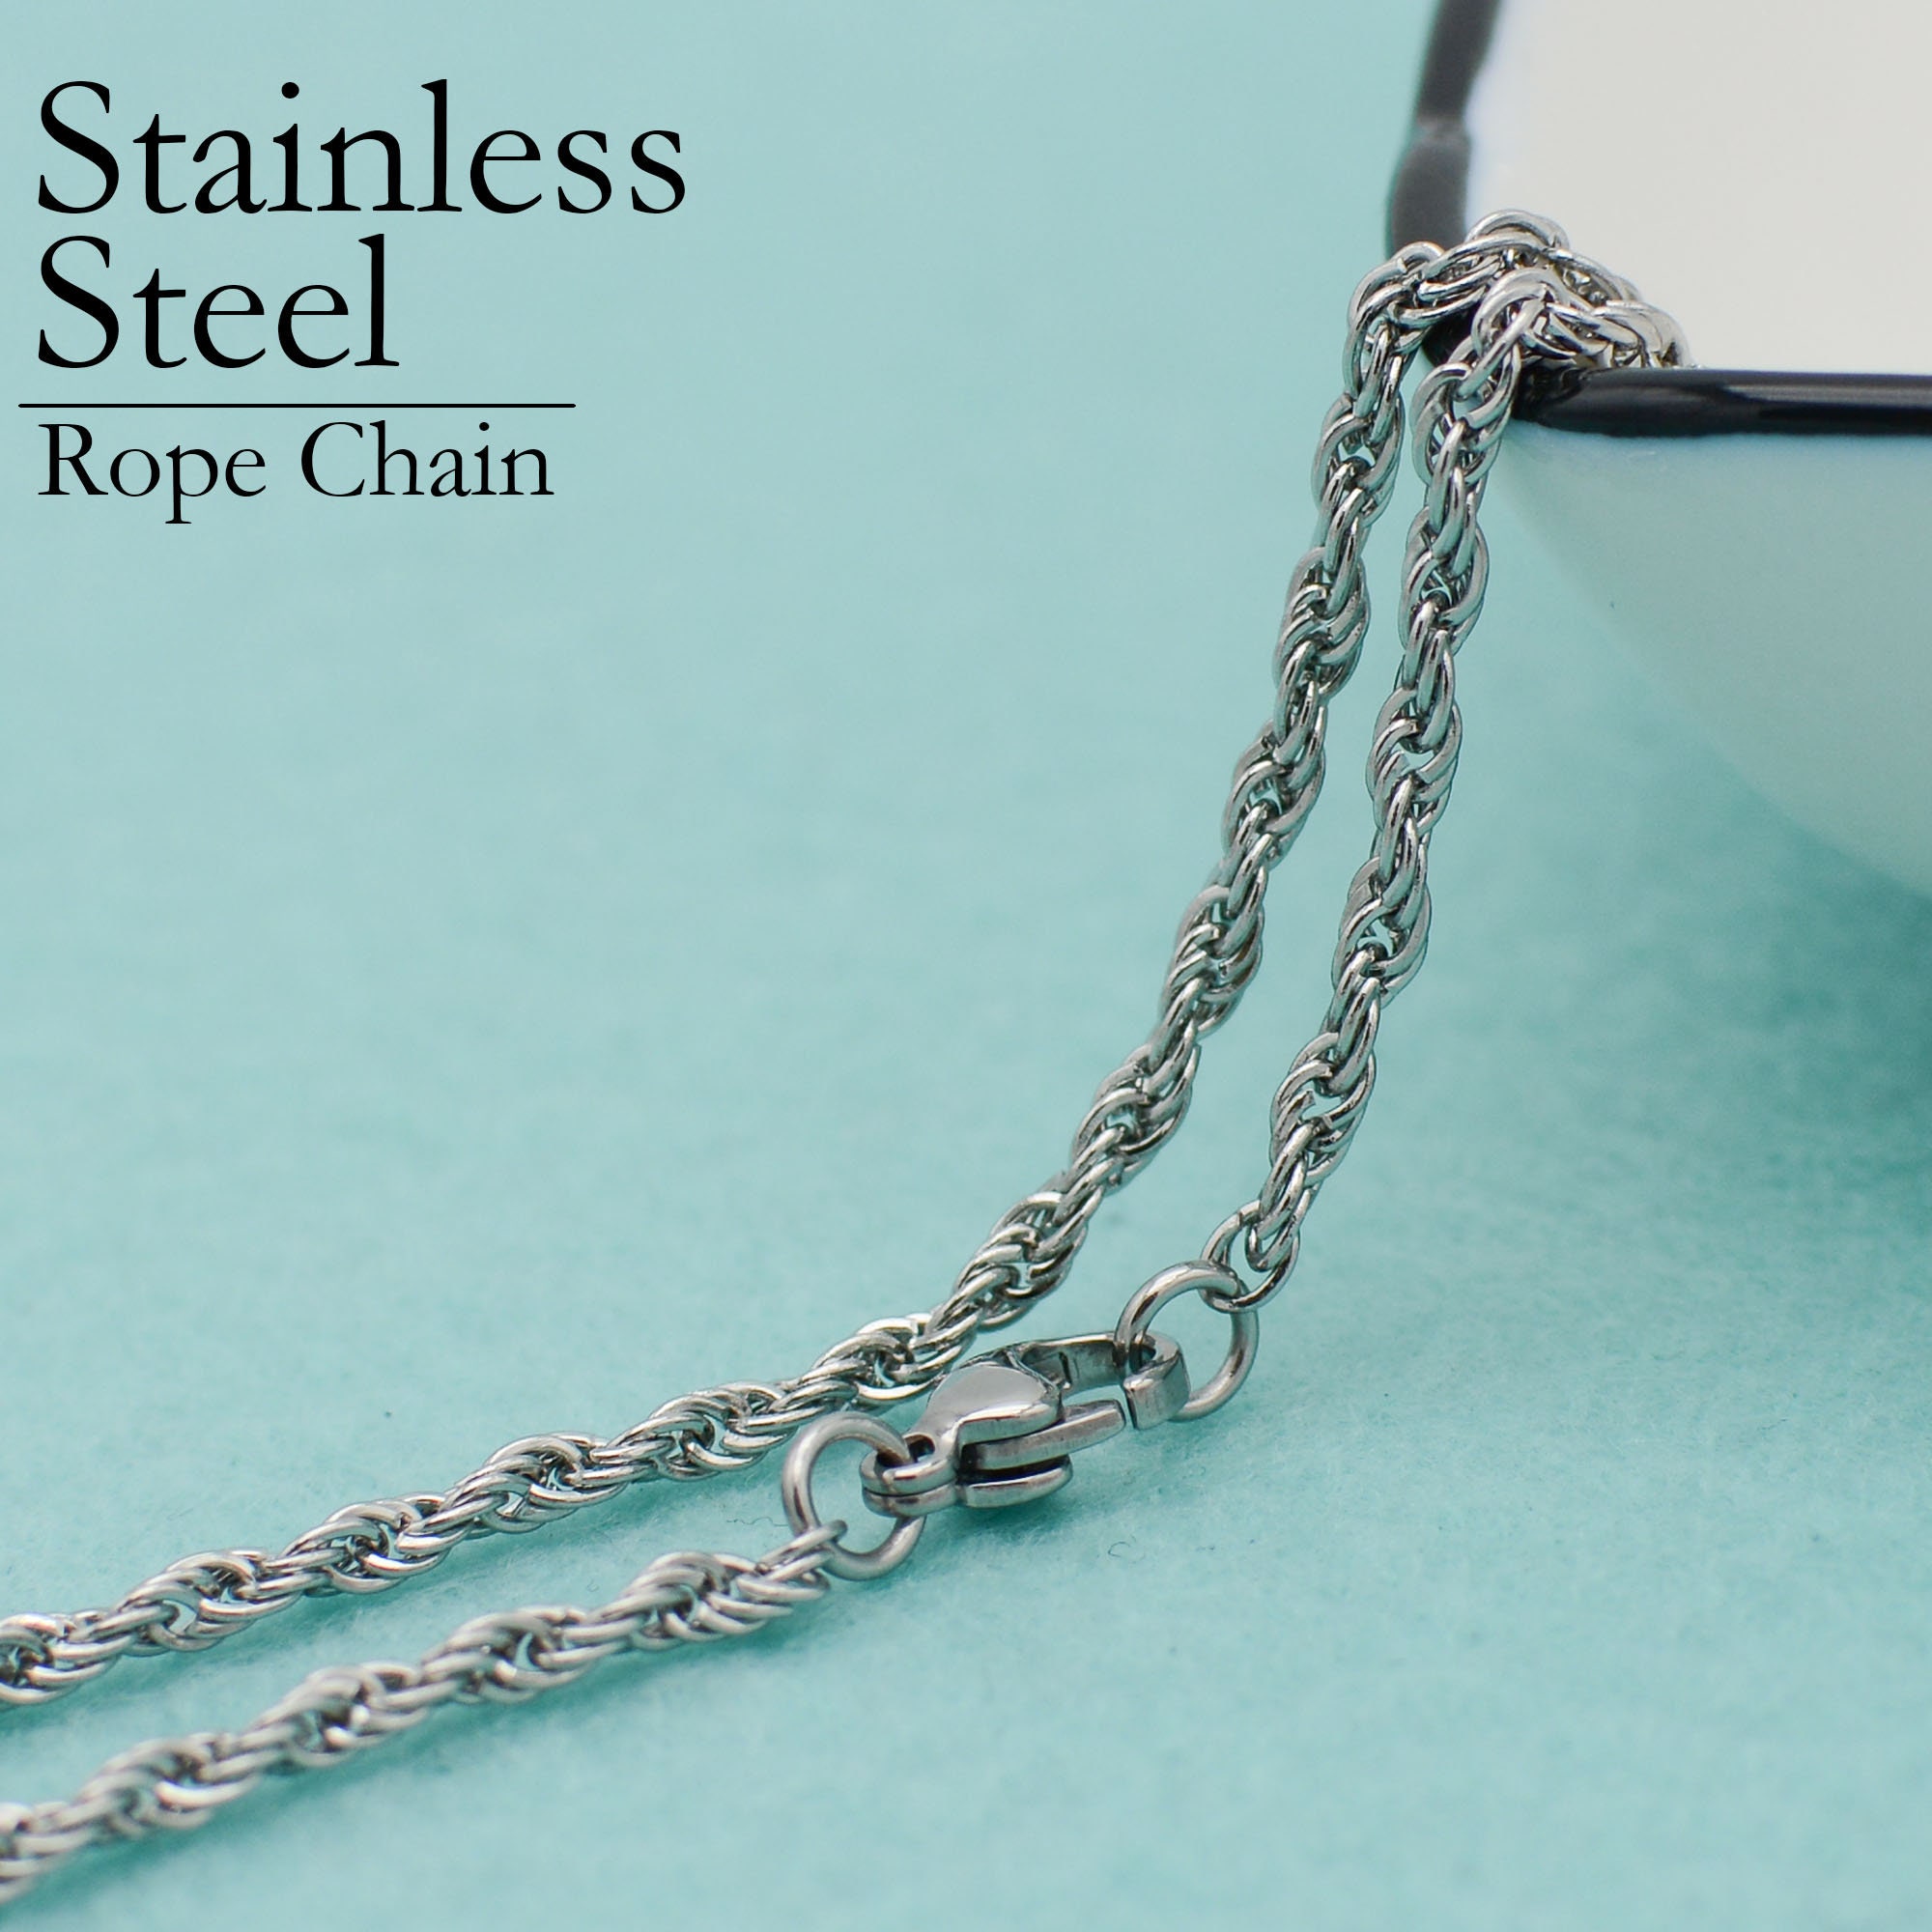 6mm Twisted Rope Stainless Steel Necklace Chain for Men or Women 